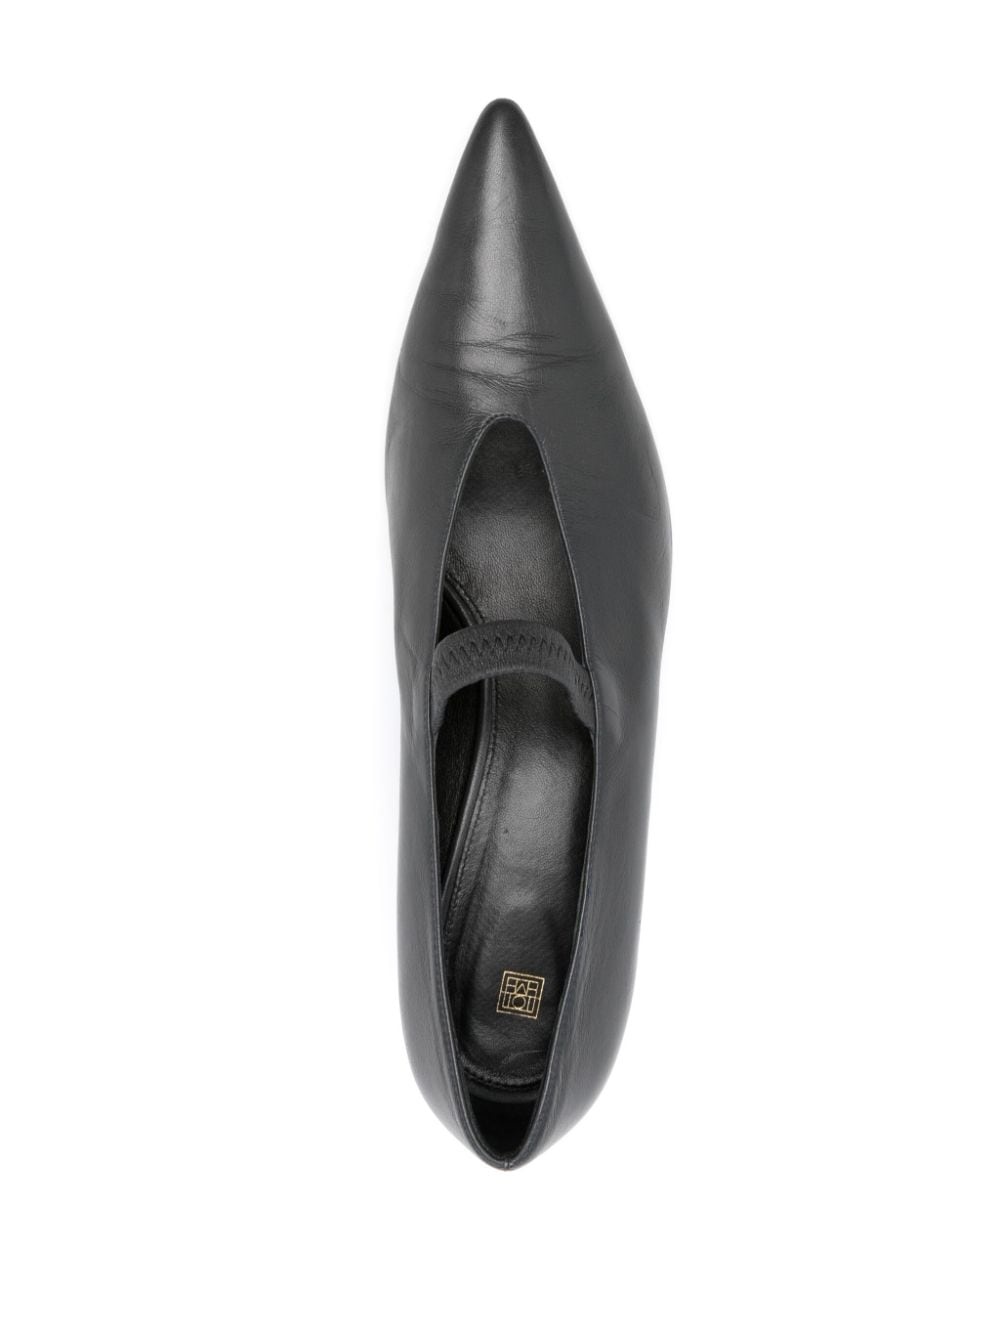 pointed toe 55mm Mary Janes - 4